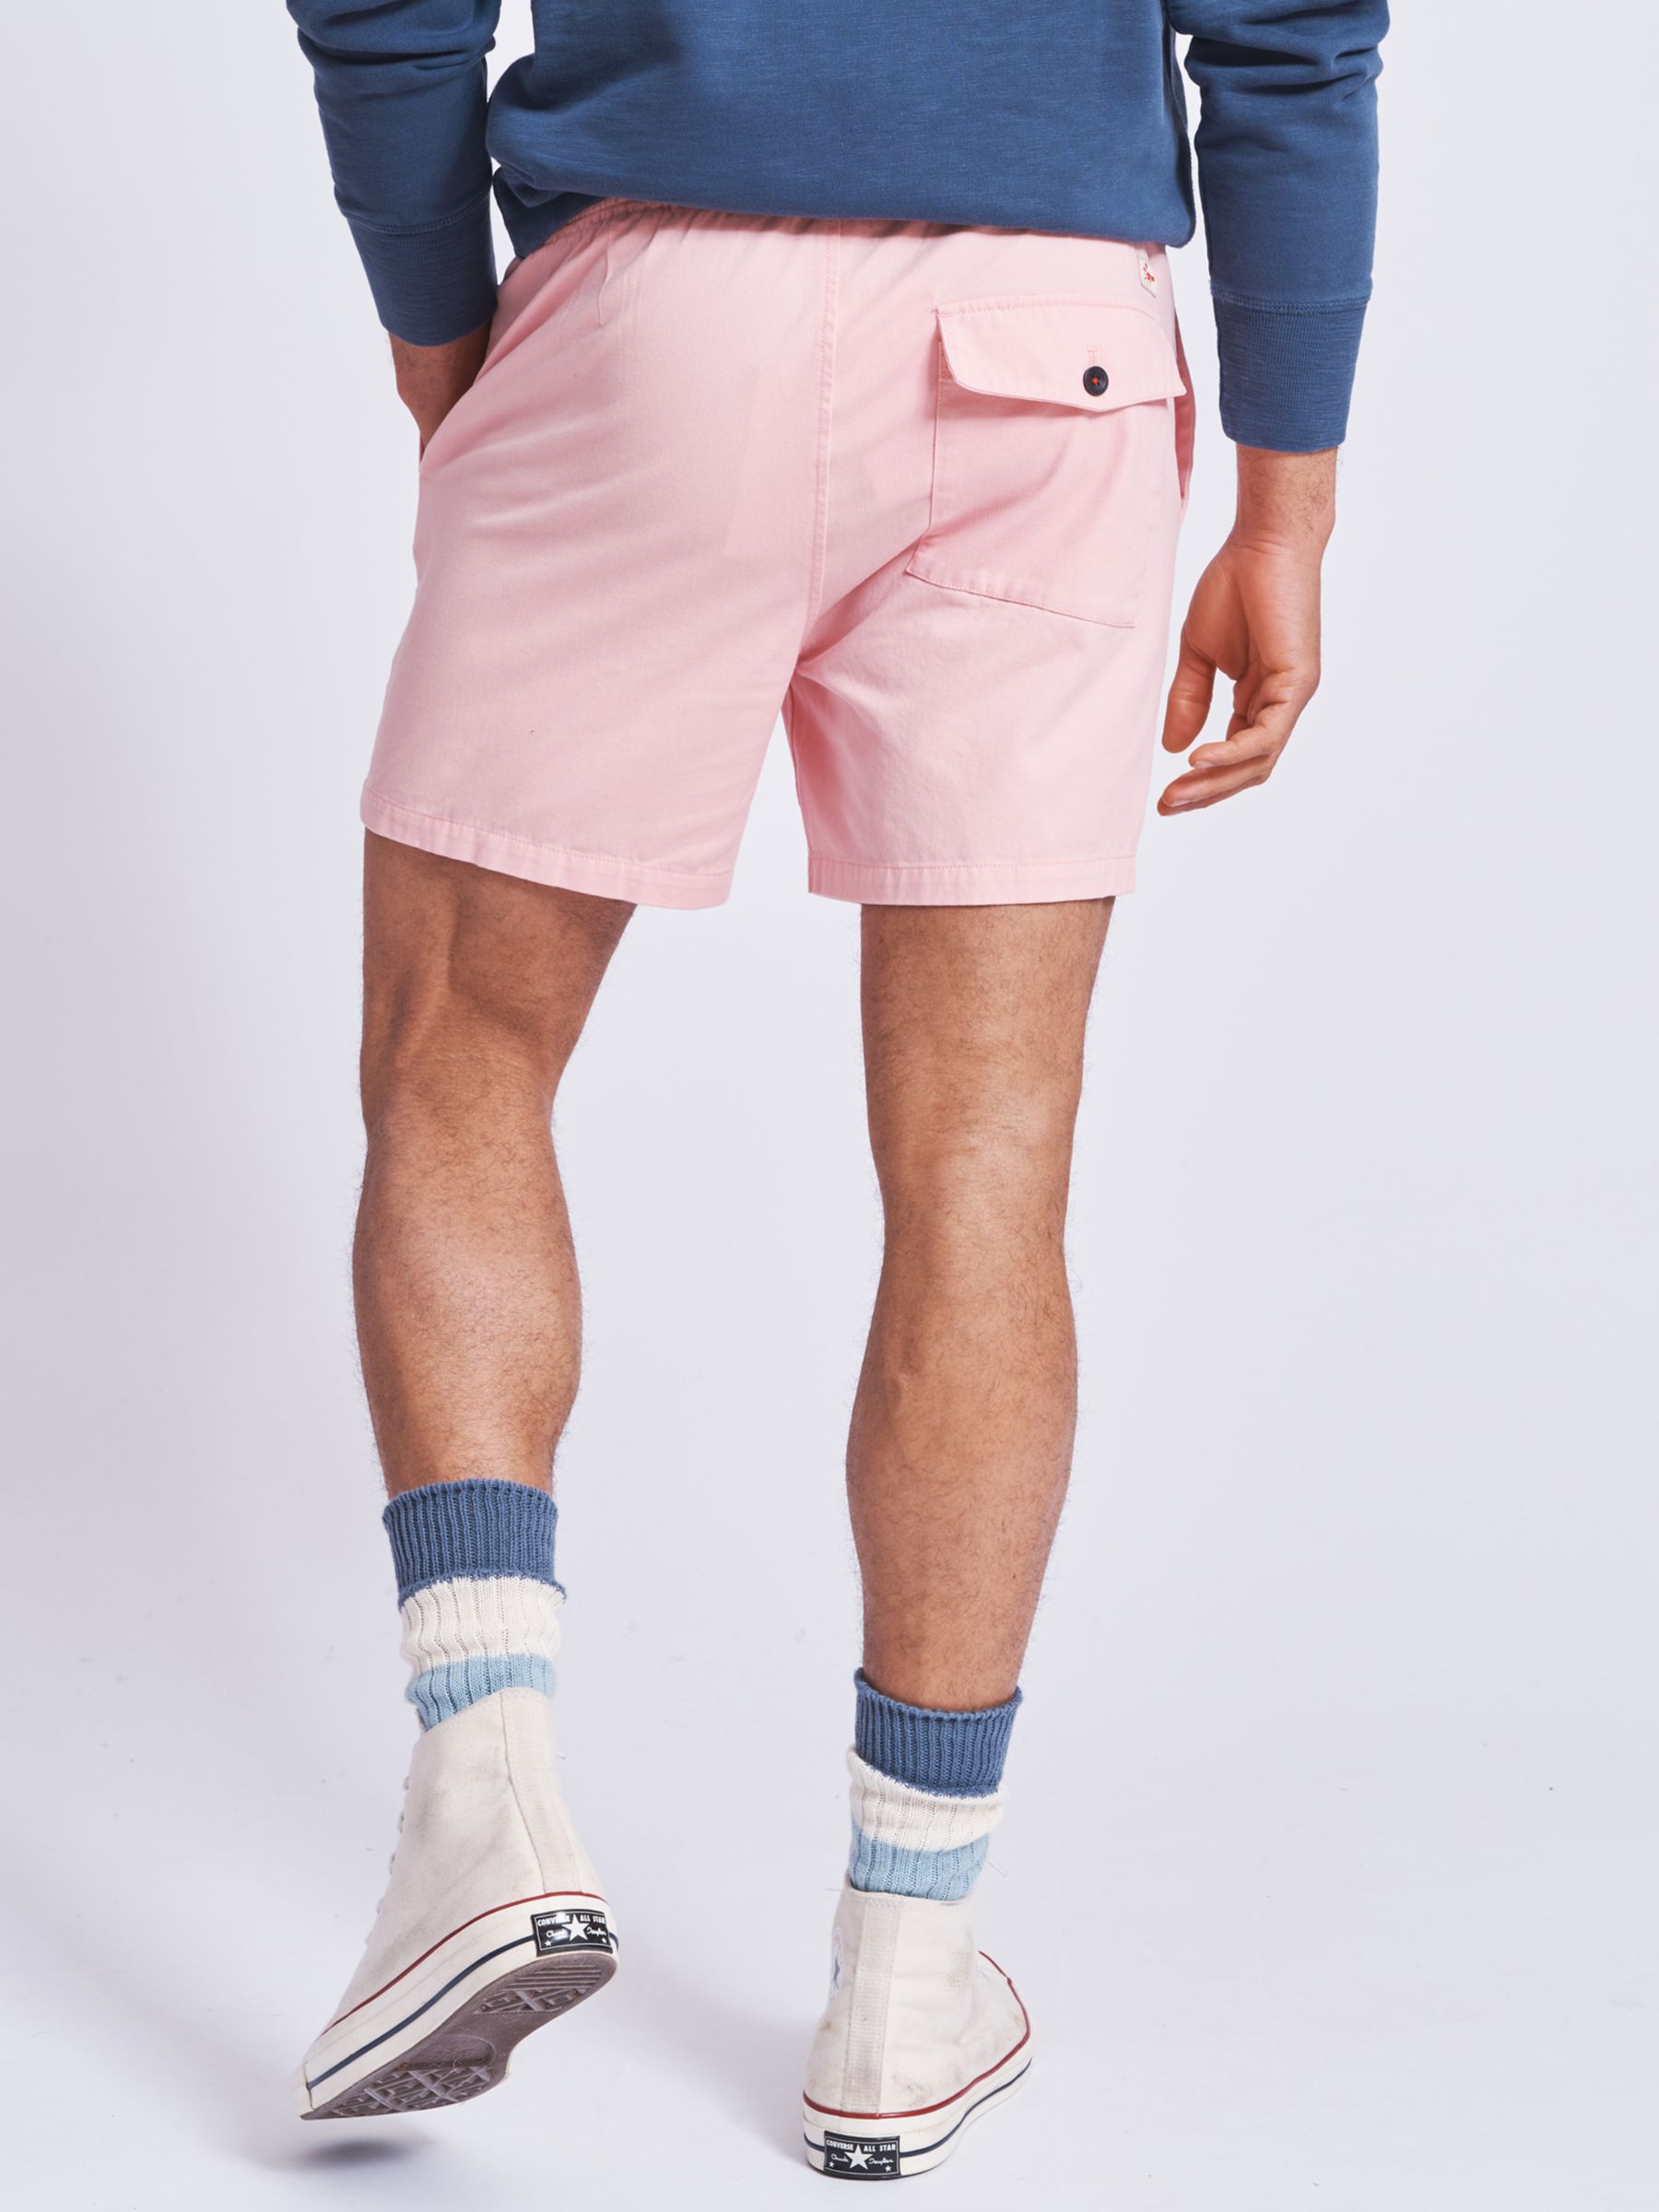 Buy Aubin Wold Rugby Shorts Online at johnlewis.com